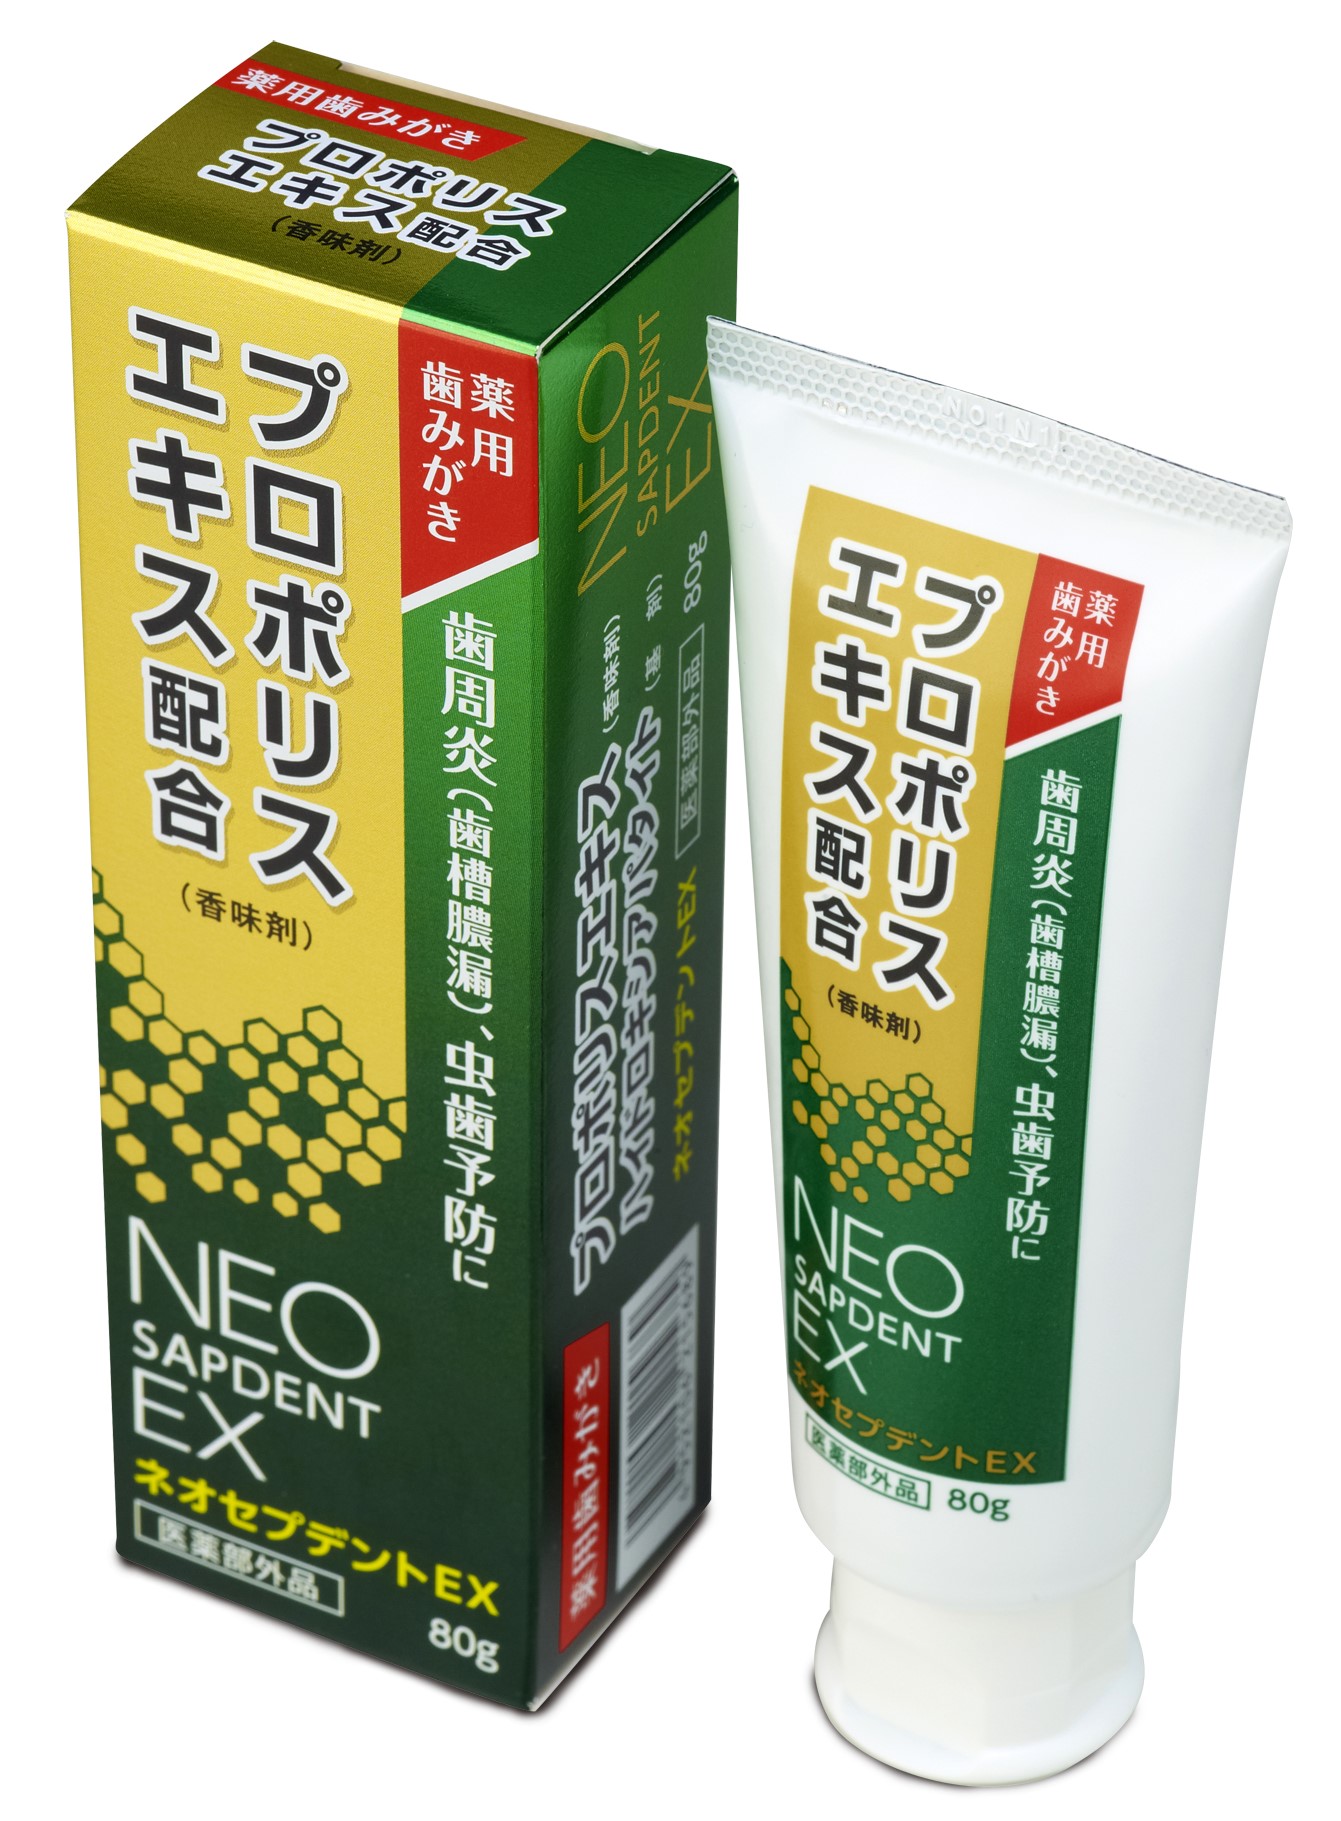 NEO SAPDENT(Medicated toothpaste containing propolis)